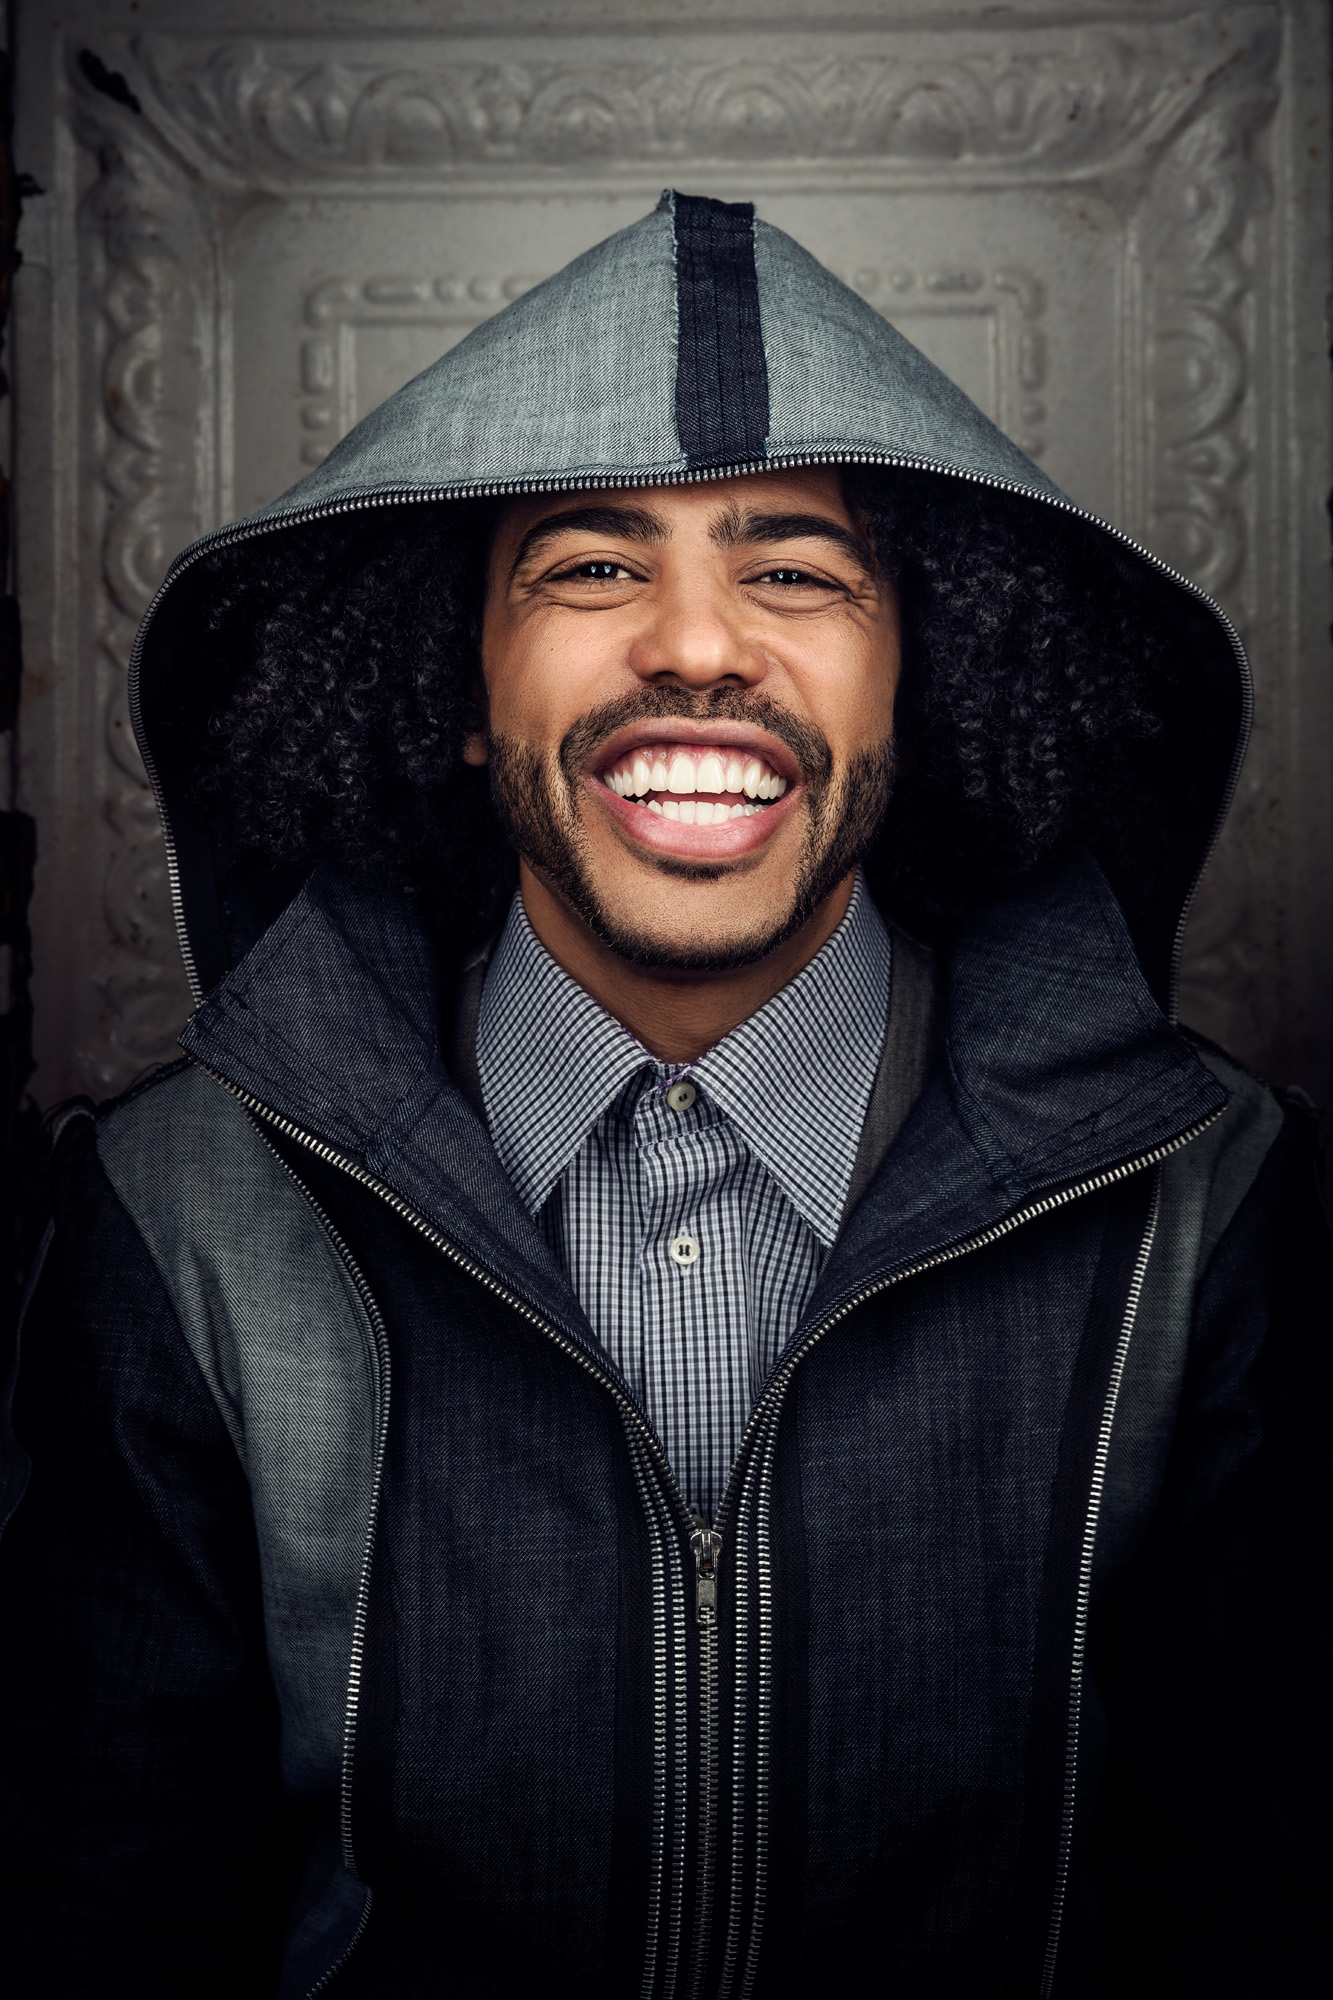 cc2016007 - Daveed Diggs photographed for NY Observer